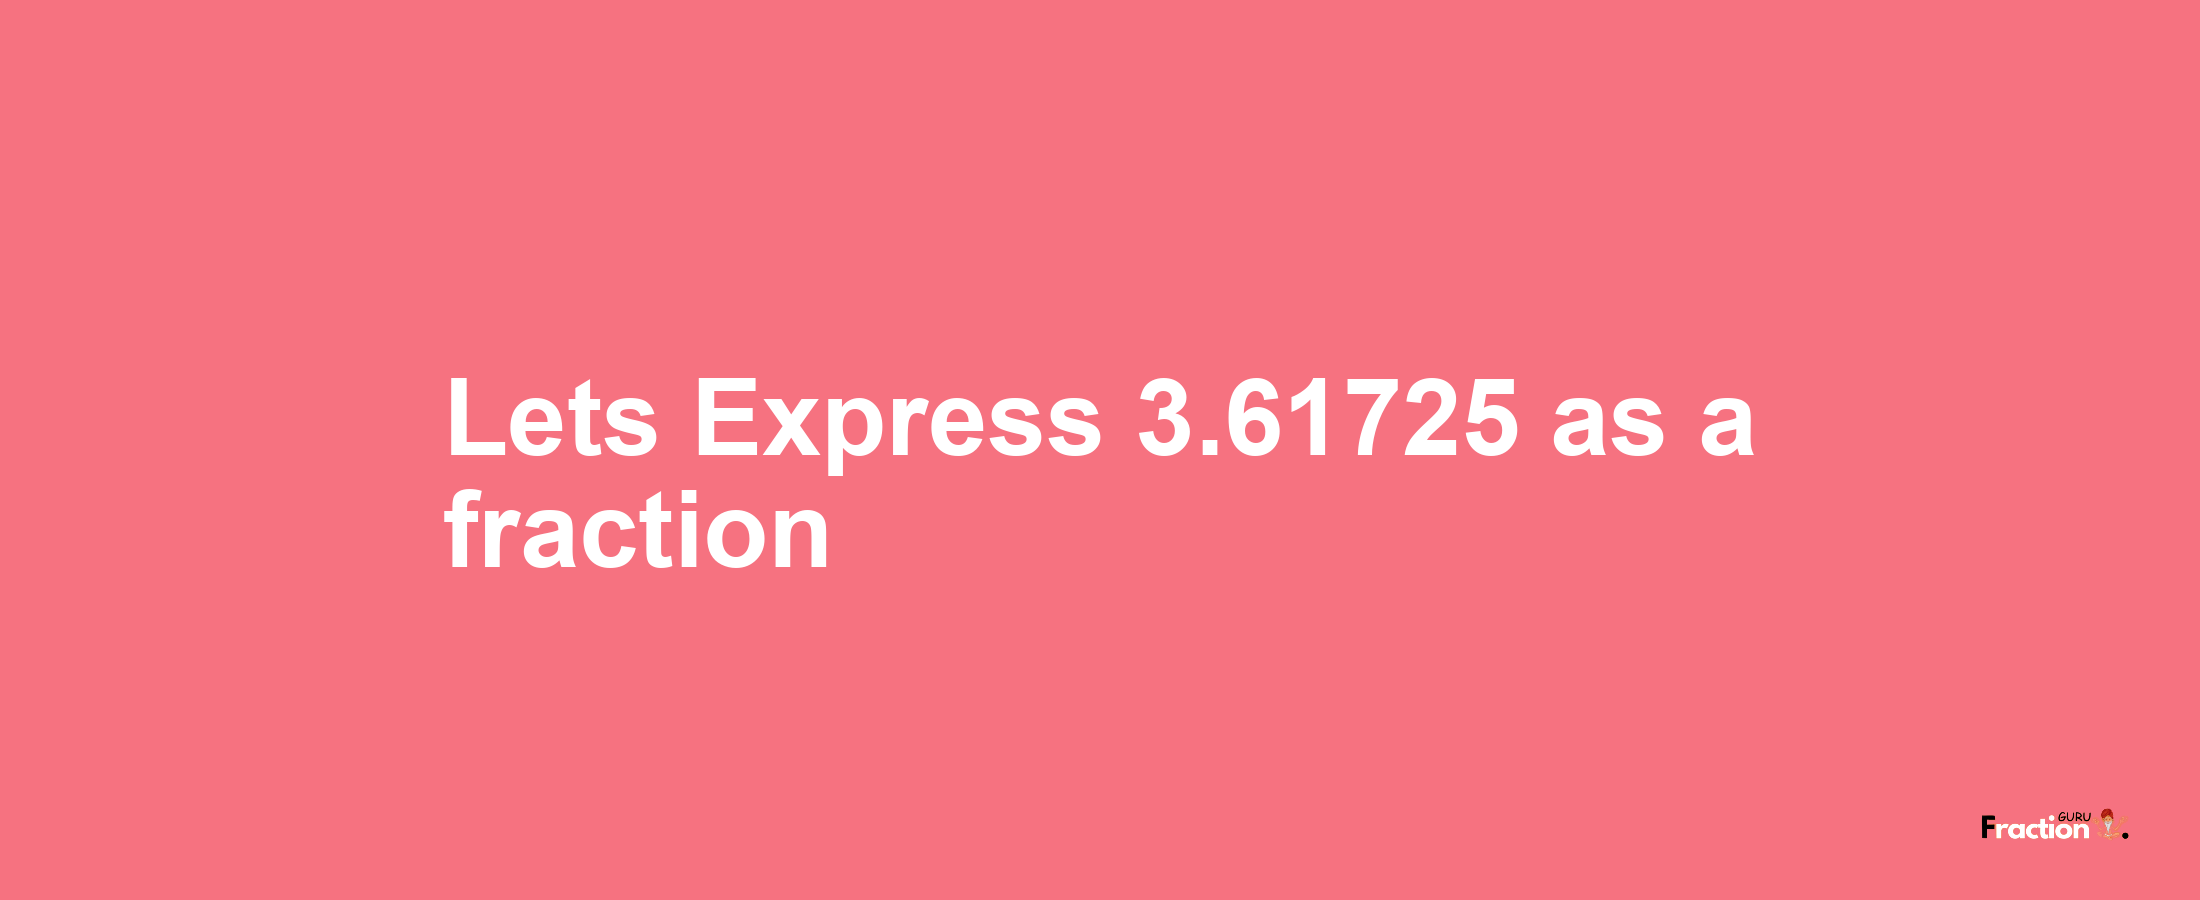 Lets Express 3.61725 as afraction